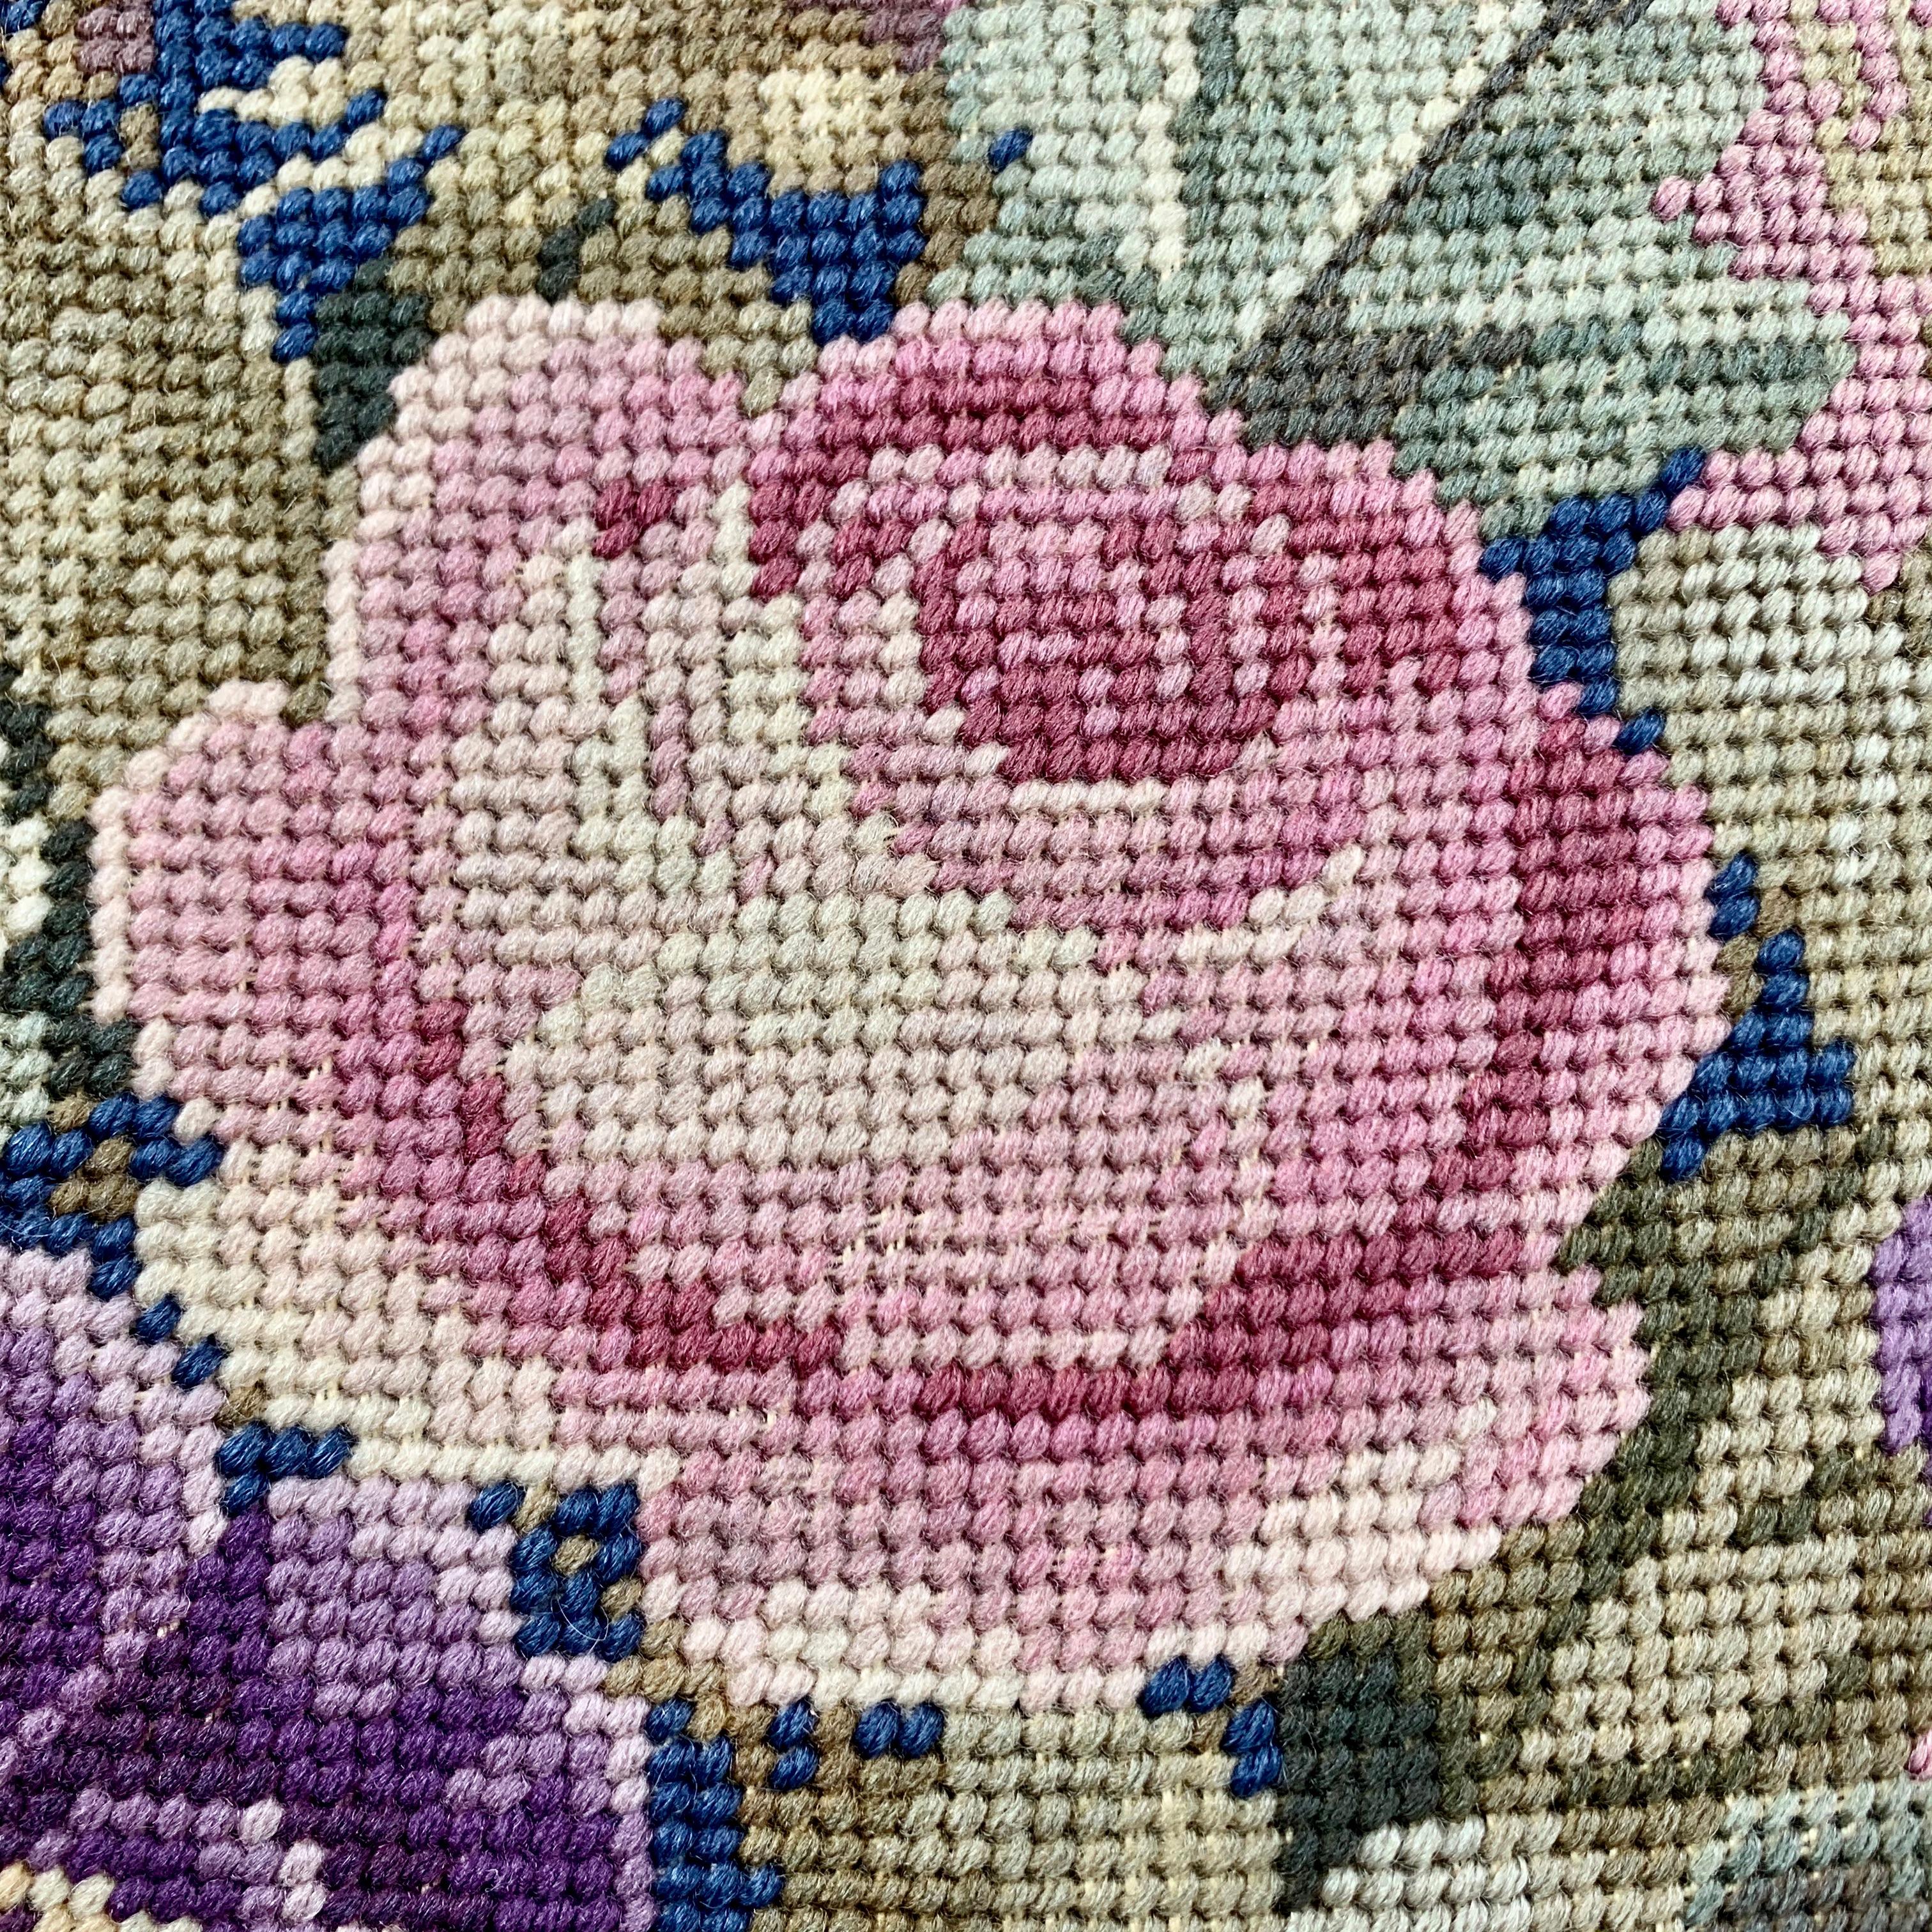 Hand-Crafted Victorian Rose Needlepoint Cushion or Decorative Pillow